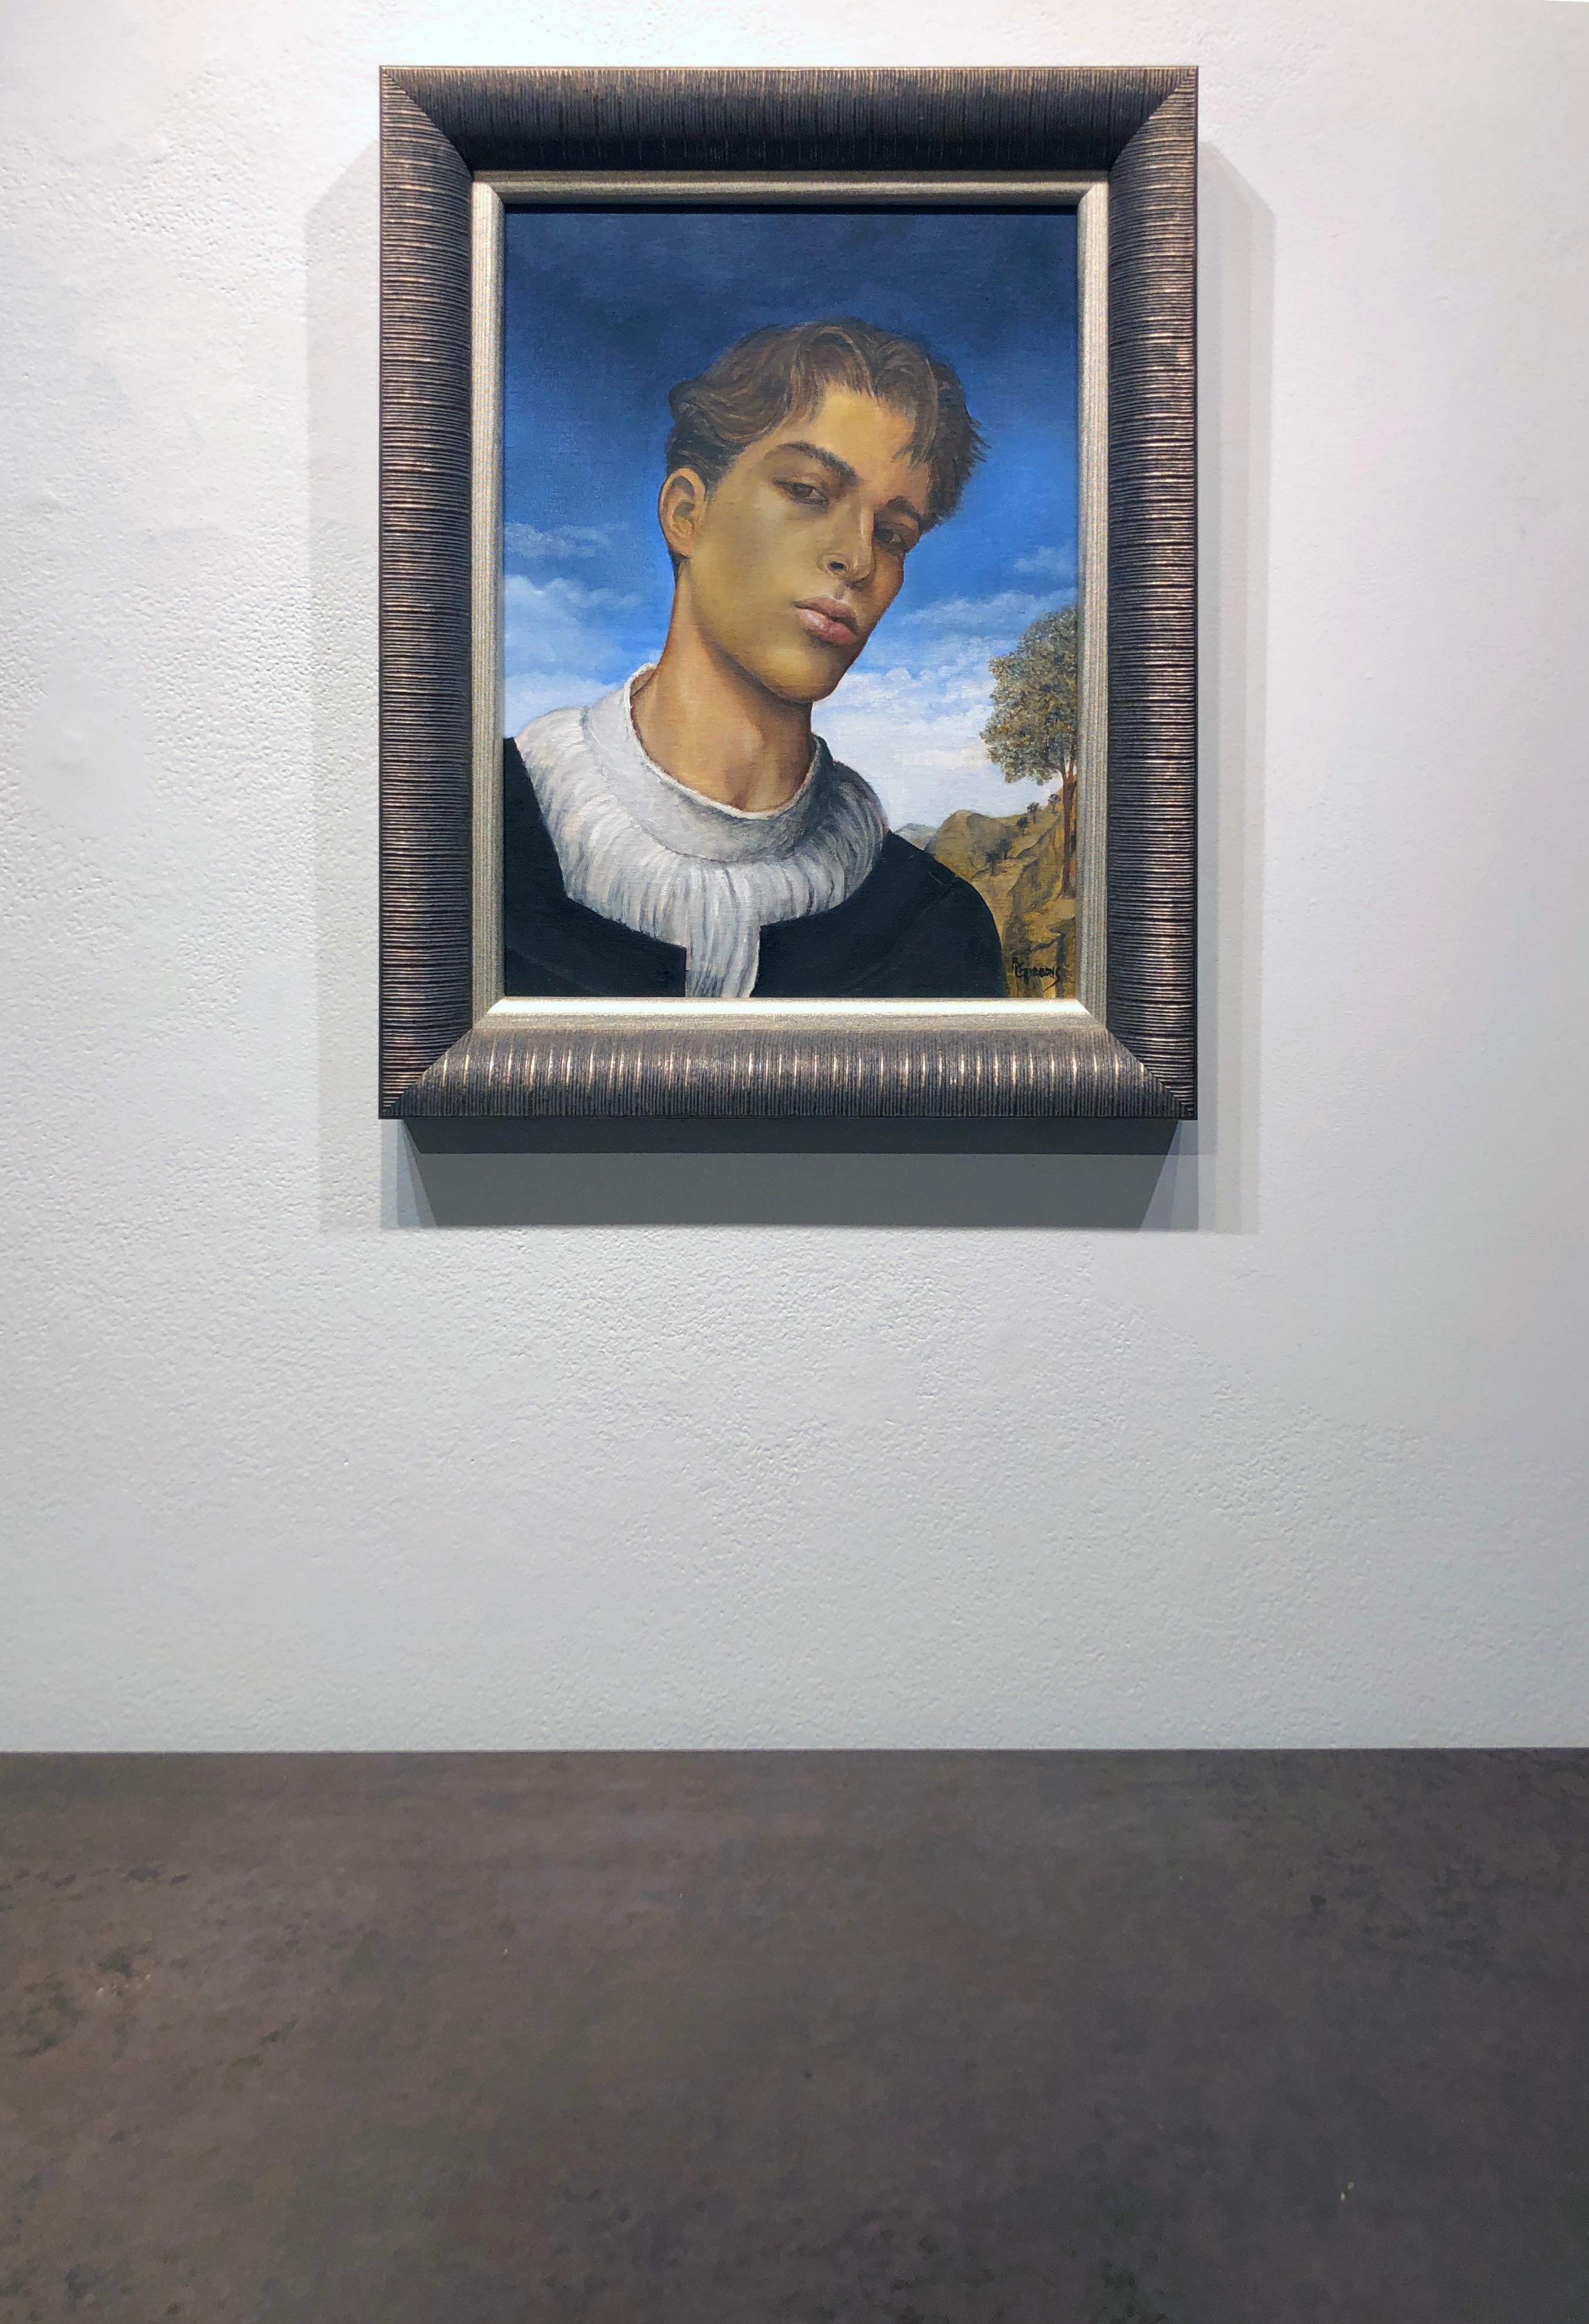 Youth, Portrait of Young Male, Renaissance Style Portraiture, Original Oil - Contemporary Painting by Richard Gibbons